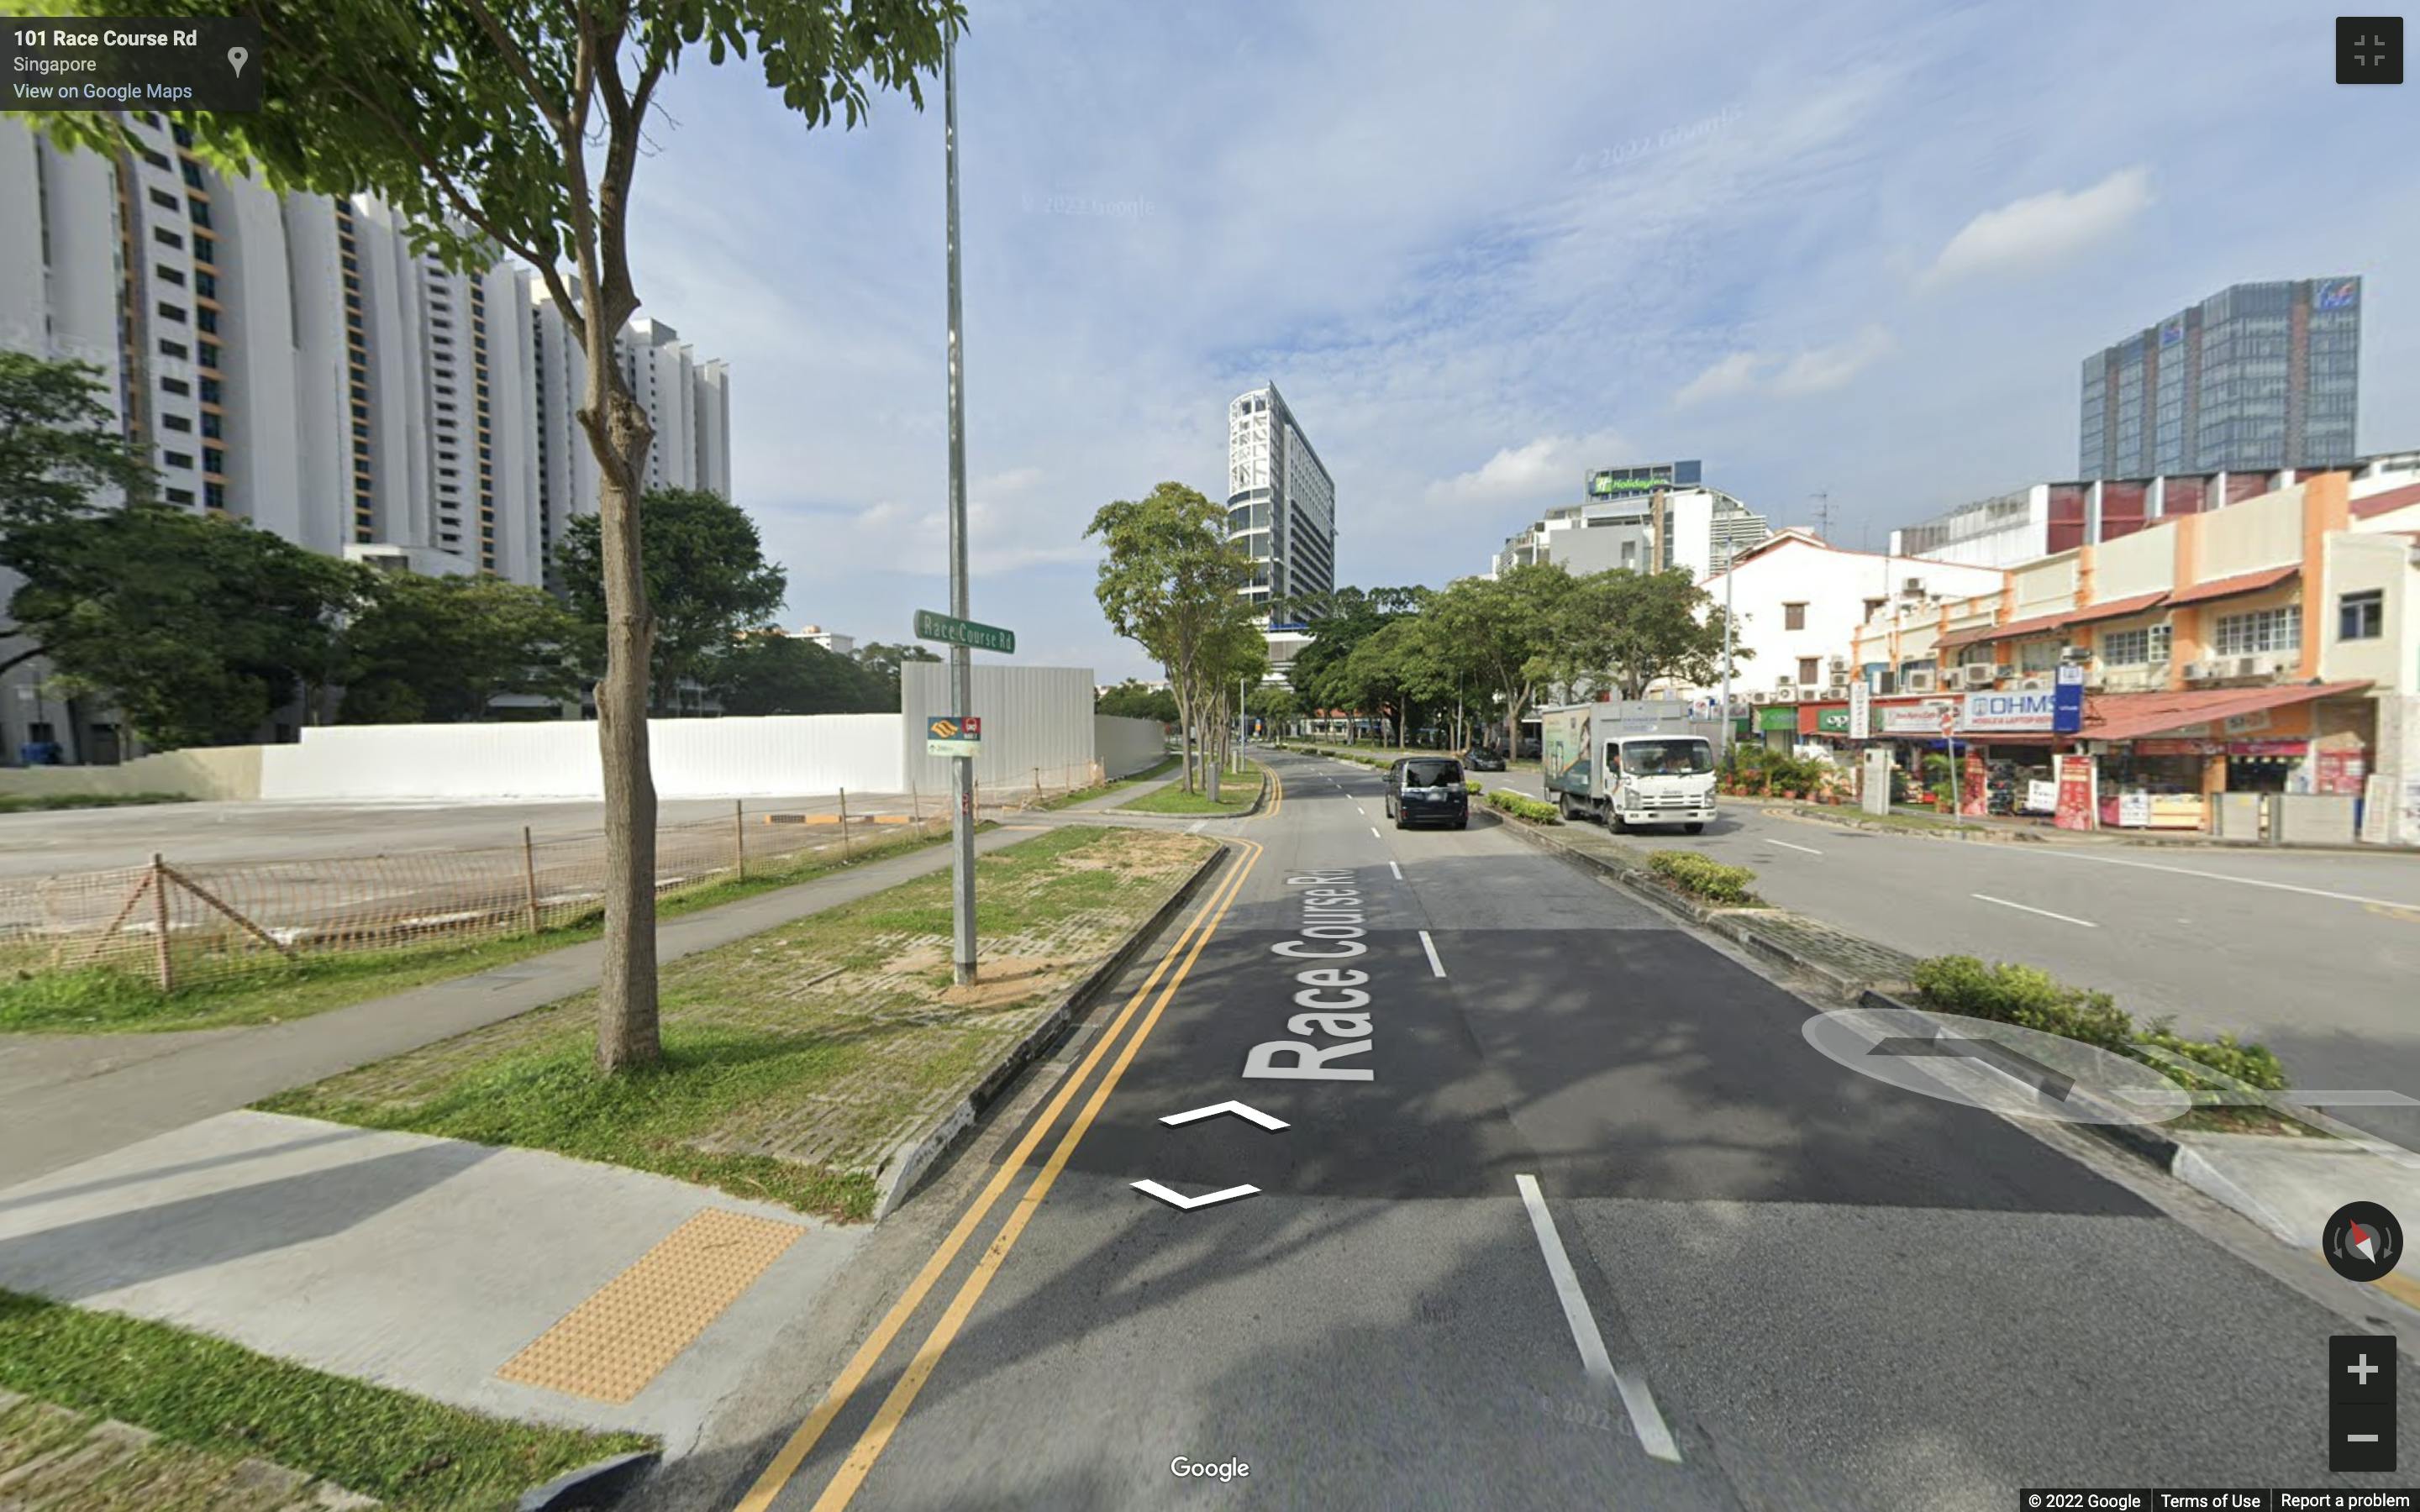 google street view of race course road